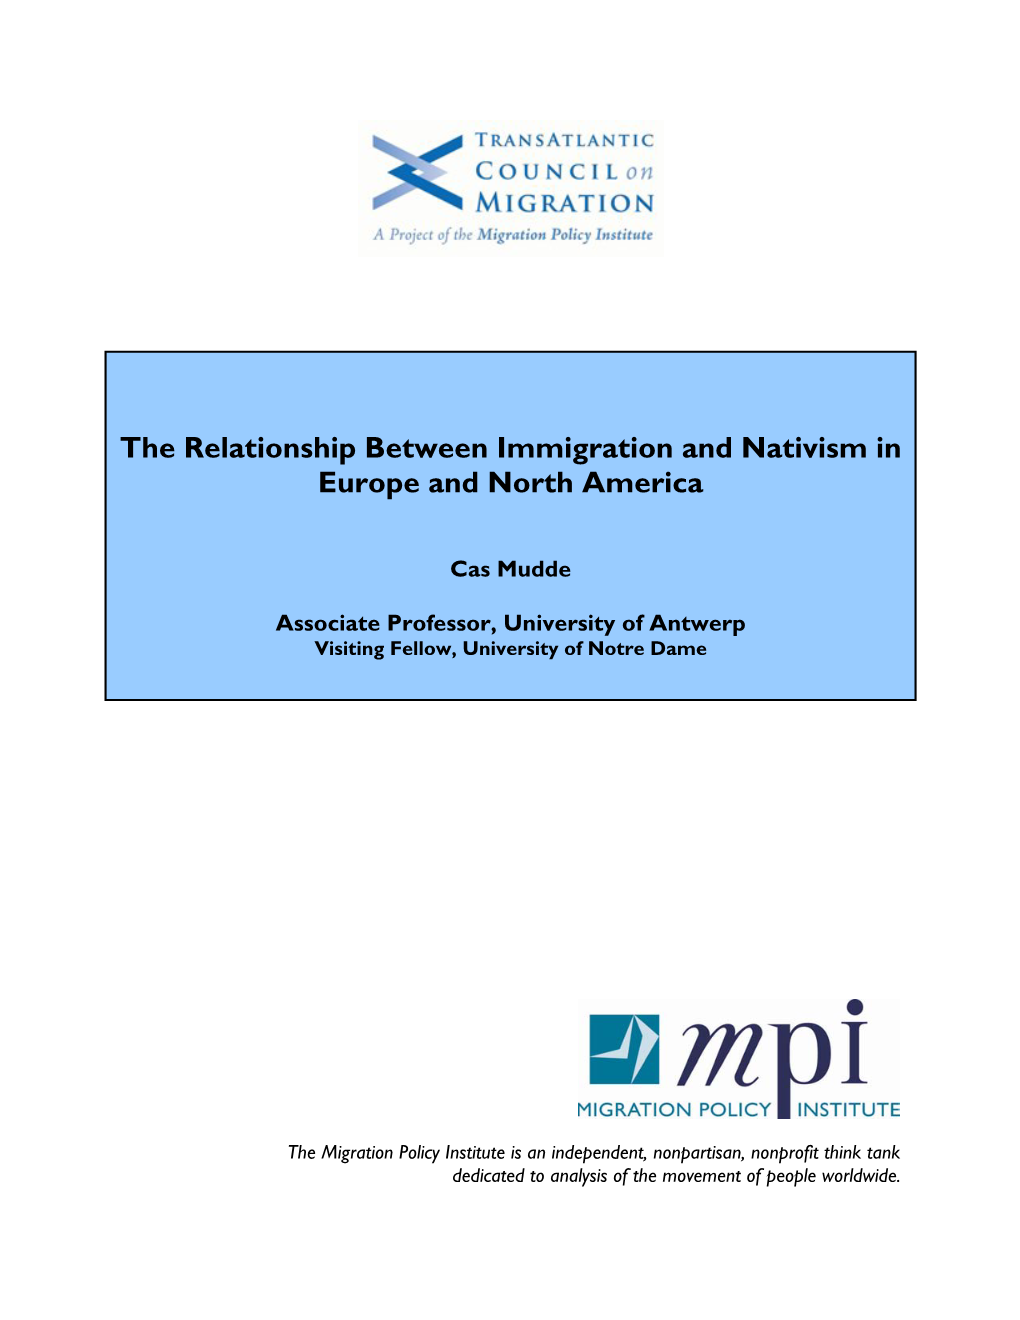 The Relationship Between Immigration and Nativism in Europe and North America